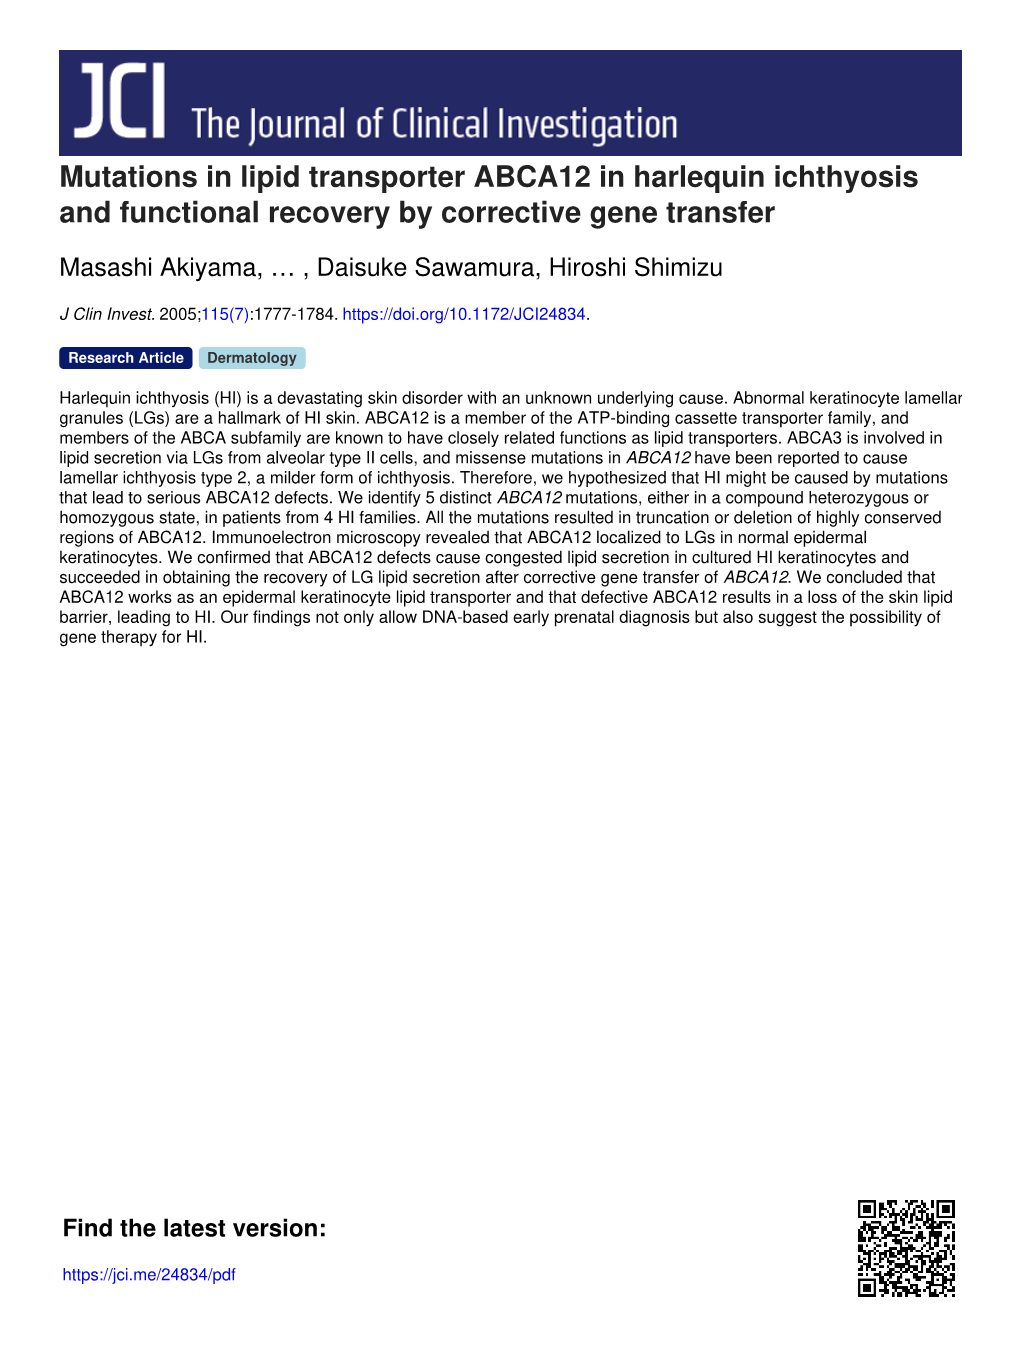 Mutations in Lipid Transporter ABCA12 in Harlequin Ichthyosis and Functional Recovery by Corrective Gene Transfer